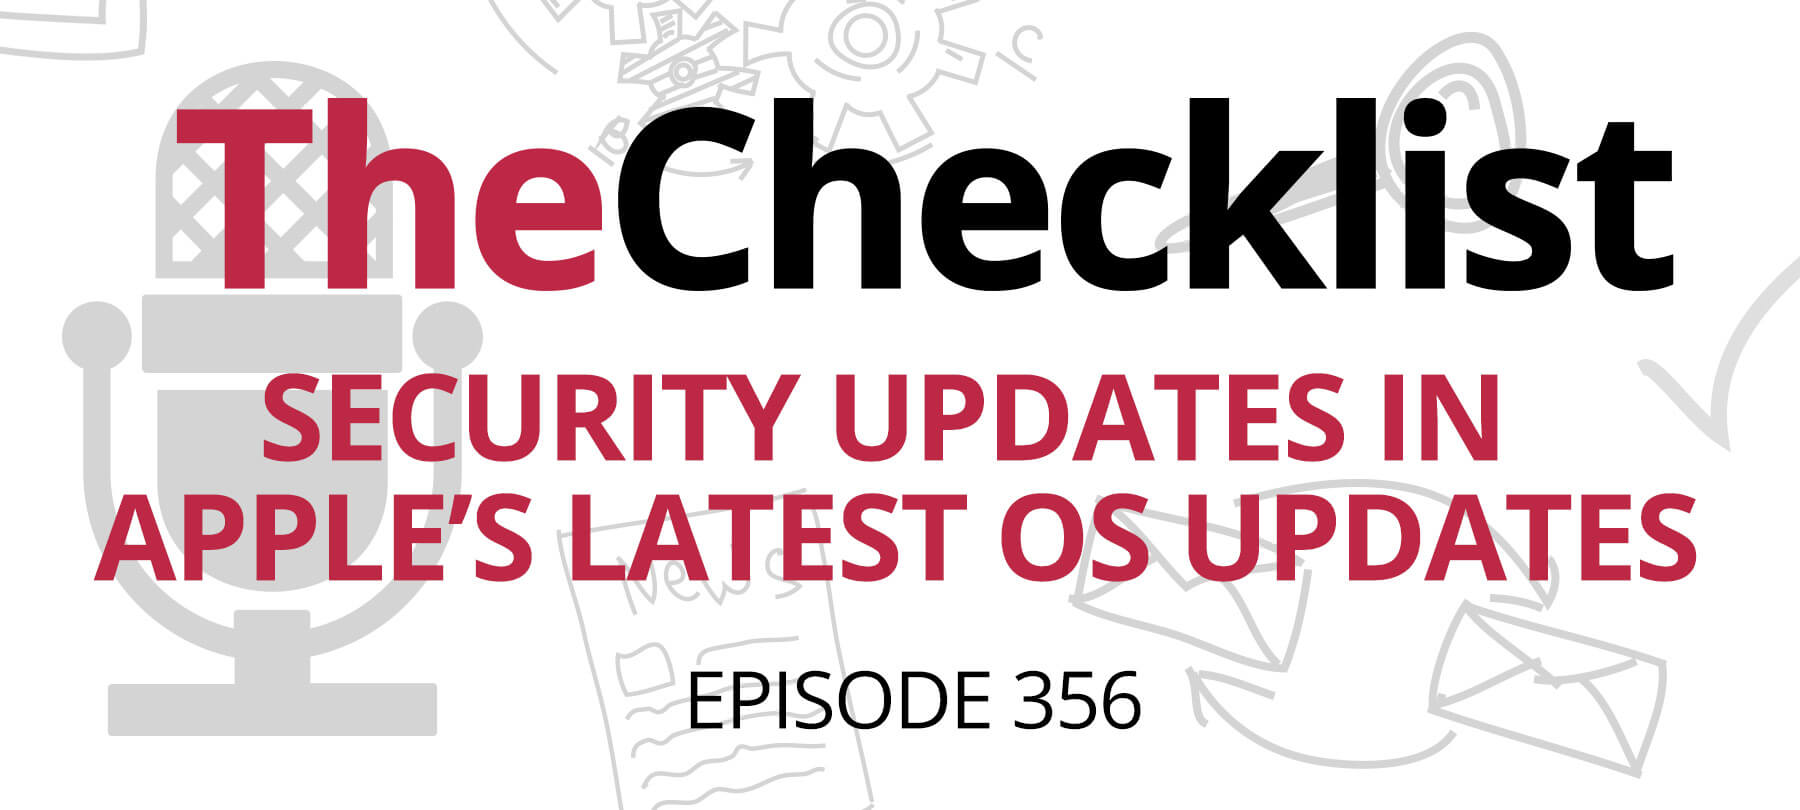 Checklist 356 title image: Security Updates in Apple’s Latest OS Updates